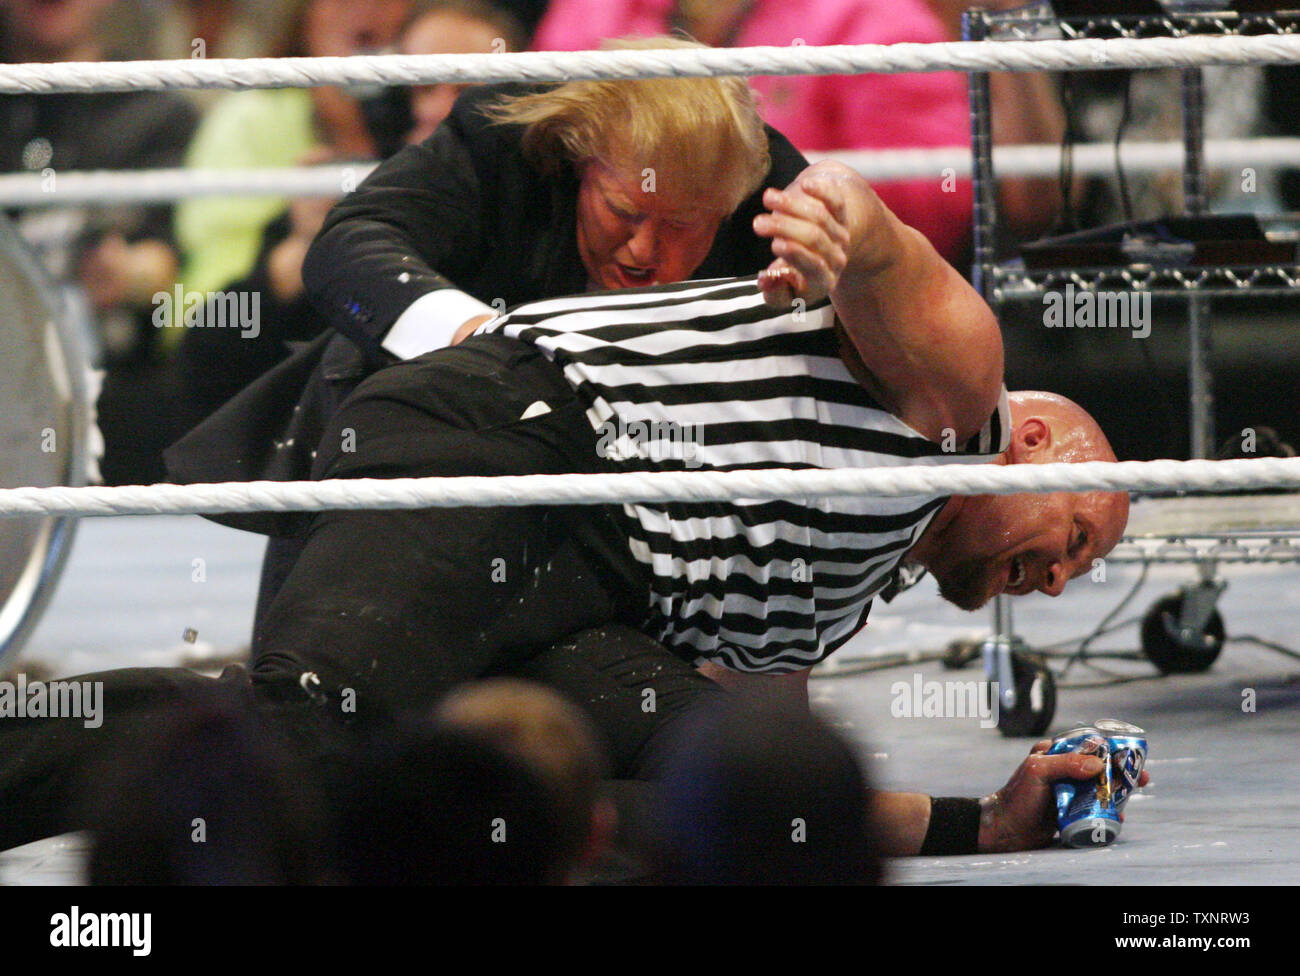 Donald Trump shoves referee Stone Cold Steve Austin following the Battle of the Billionaires match during Wrestlemania 23 at Ford Field in Detroit on April 1, 2007.  Trump's wrestler, Bobby Lashley, defeated WWE Chairman Vince McMahon's wrestler, Umaga.  (UPI Photo/Scott R. Galvin) Stock Photo